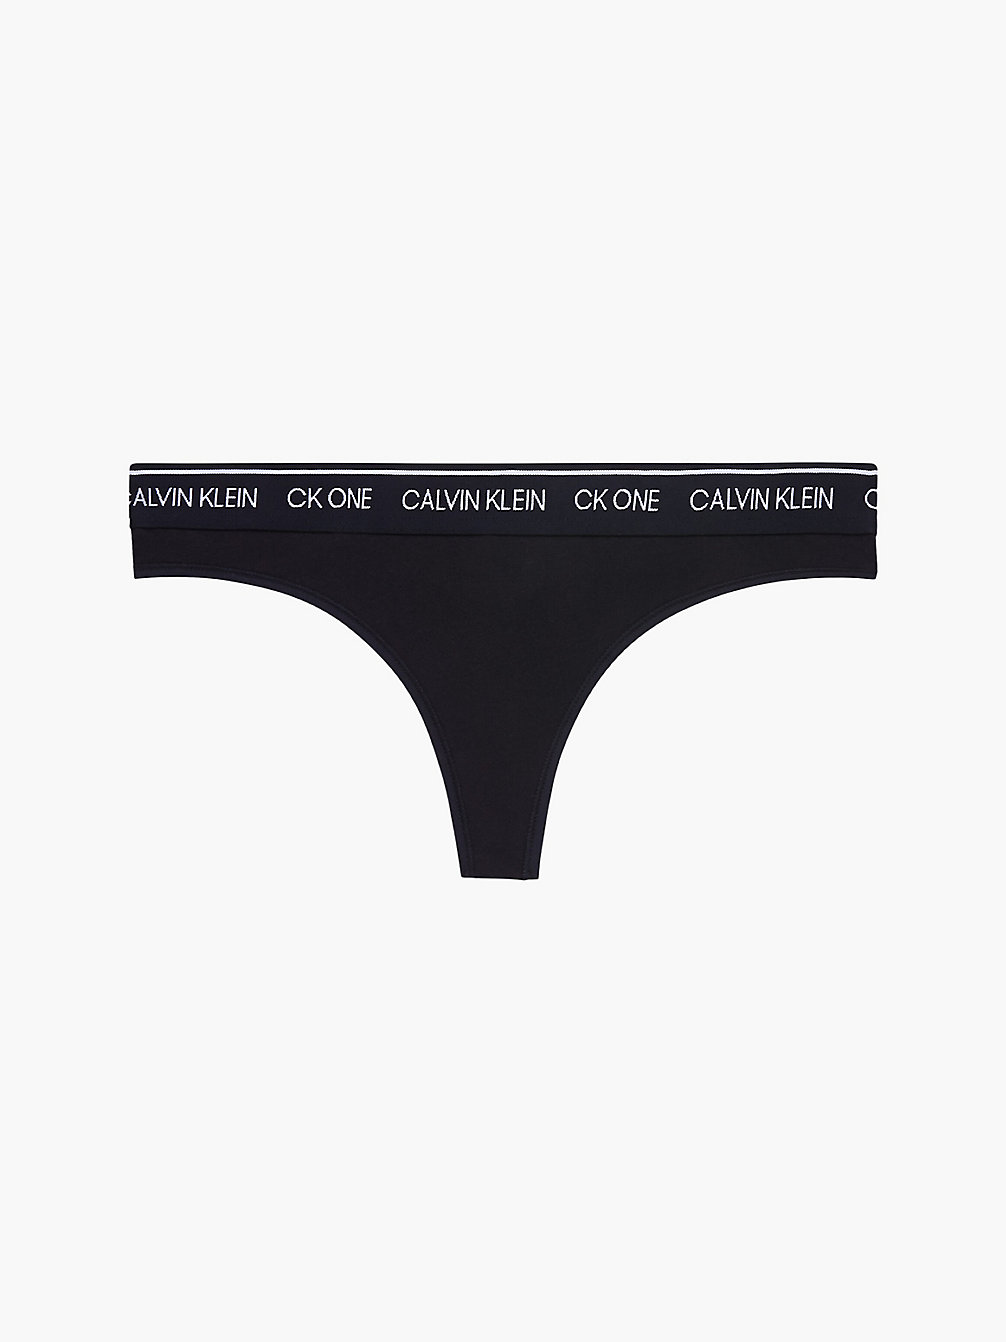 Tanga - CK One > BLACK > undefined mujer > Calvin Klein